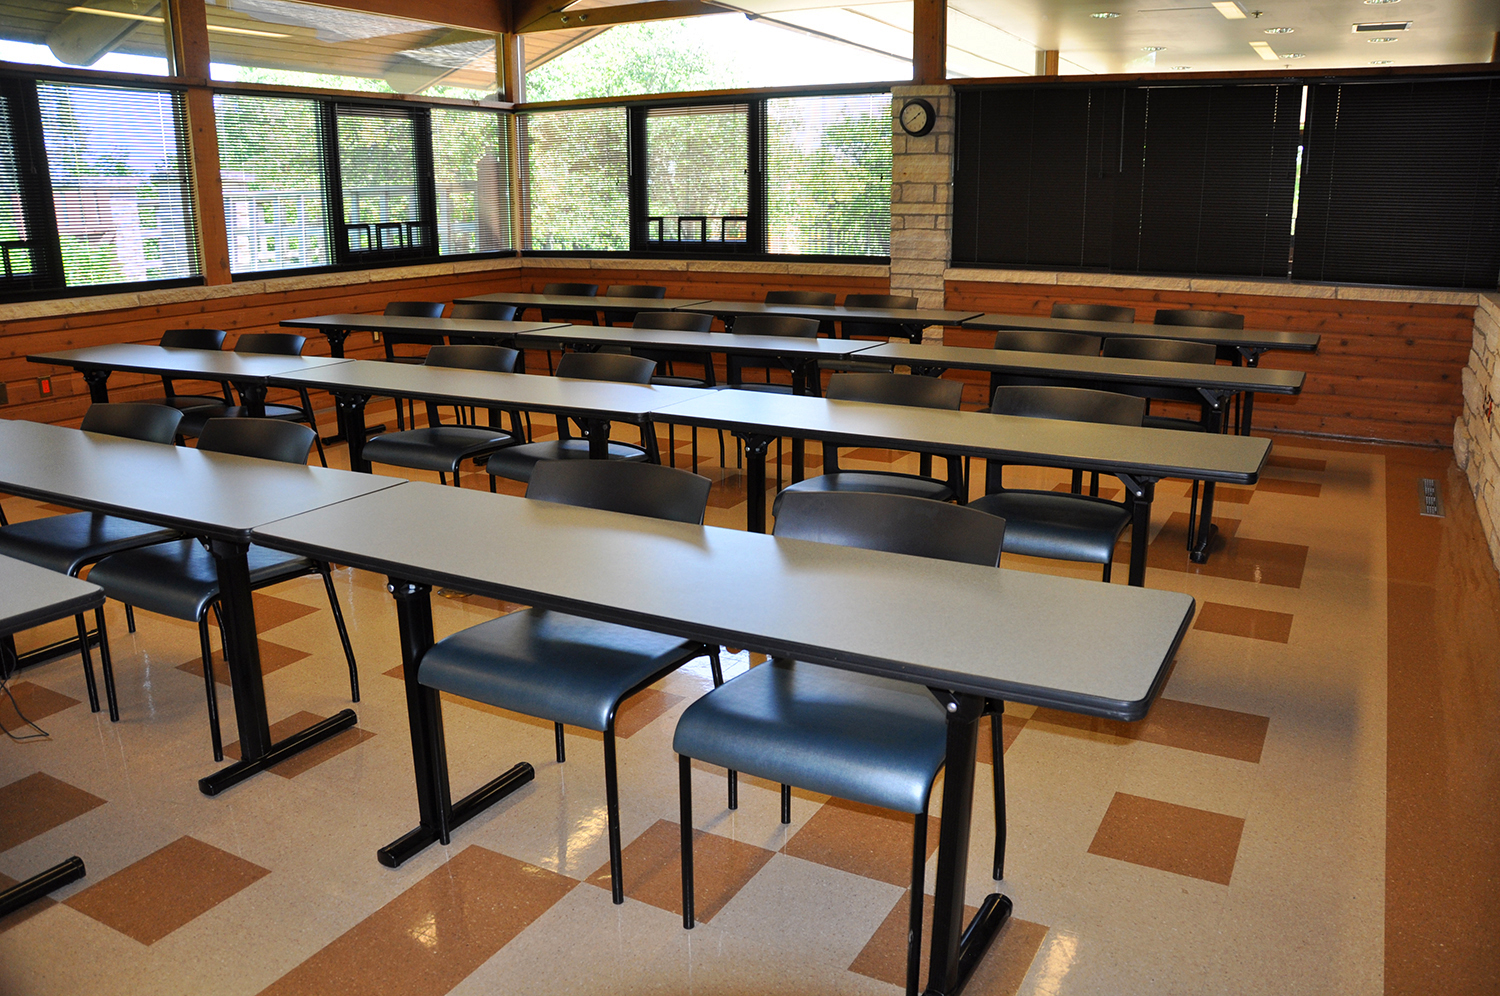  classroom rental with rows of tables and chairs